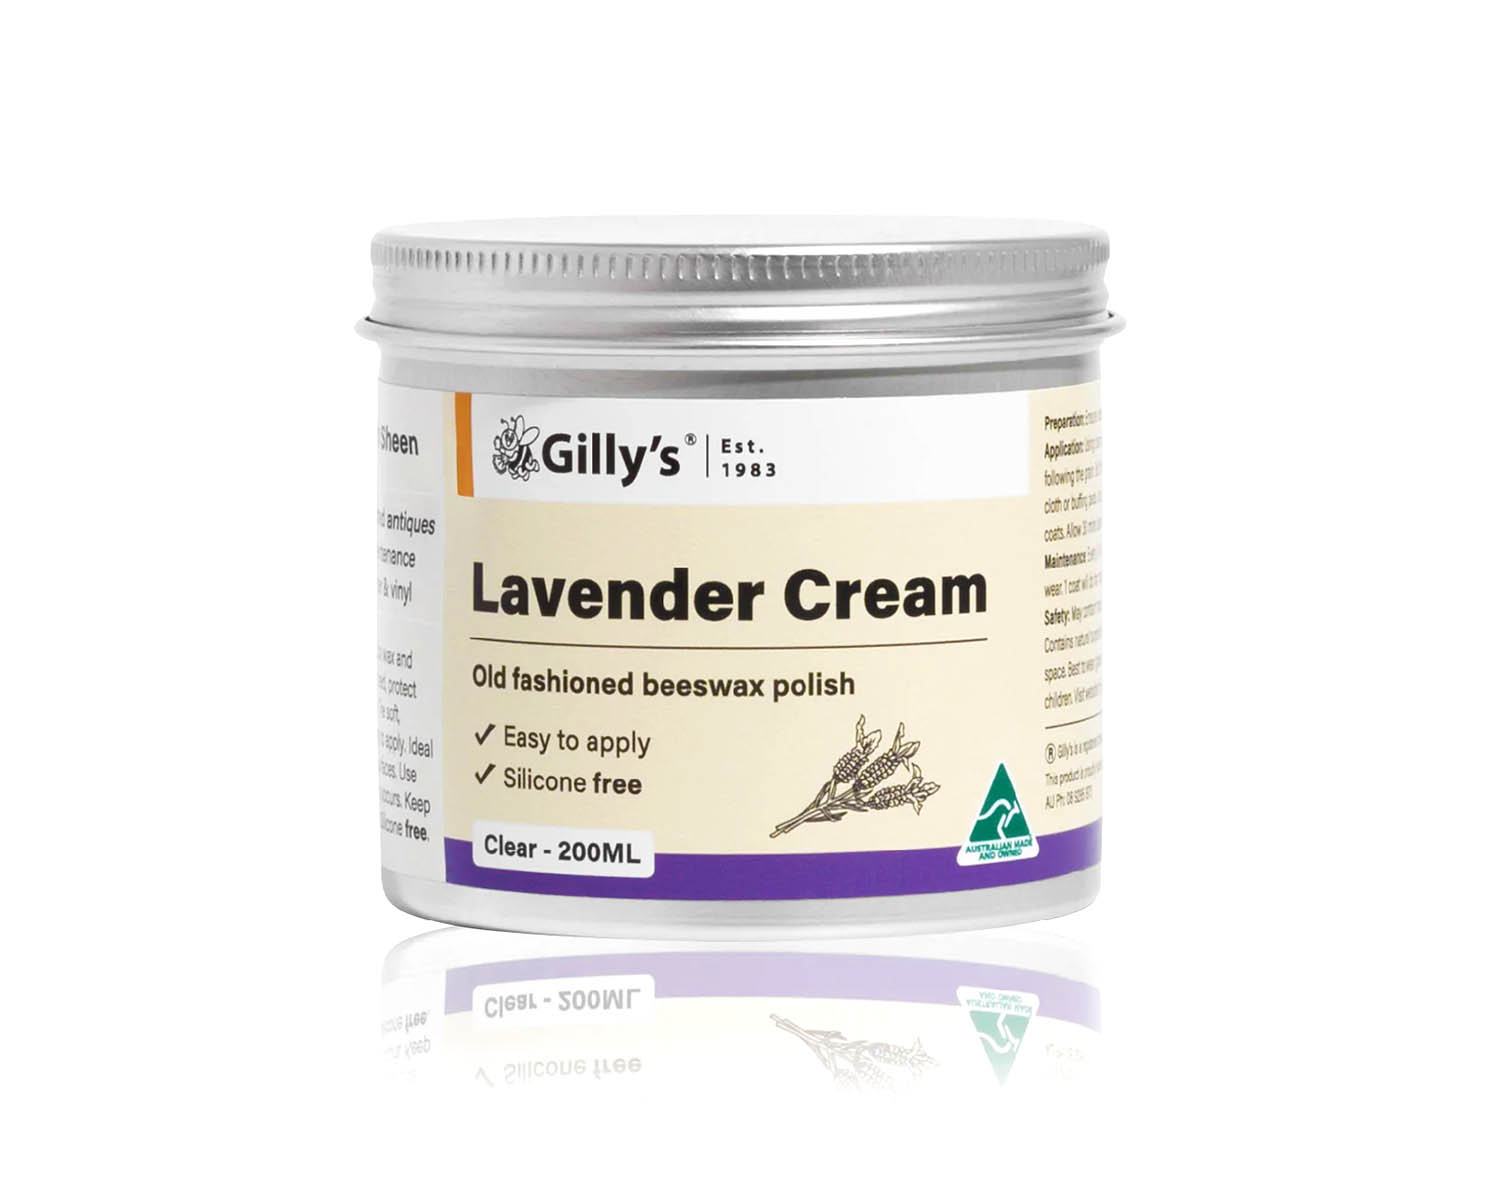 Cream Polish - Old Fashioned Beeswax Polish - Lavender Scent - 250ml - Gilly's ®